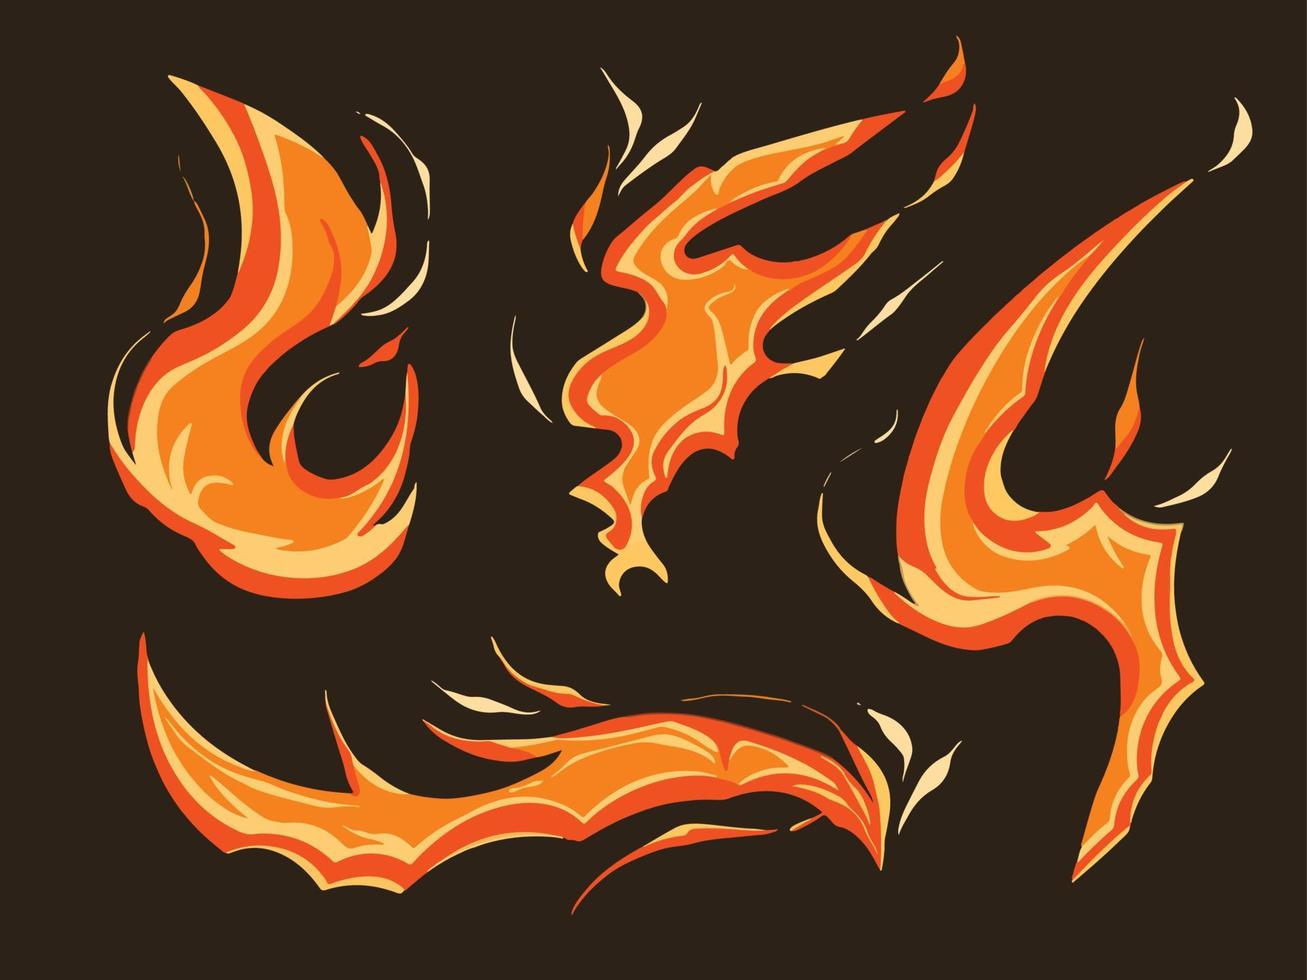 Set collection of fire flames burning hot graphic resources element decoration vector illustration. Cartoon flat art style decor of natural hot element